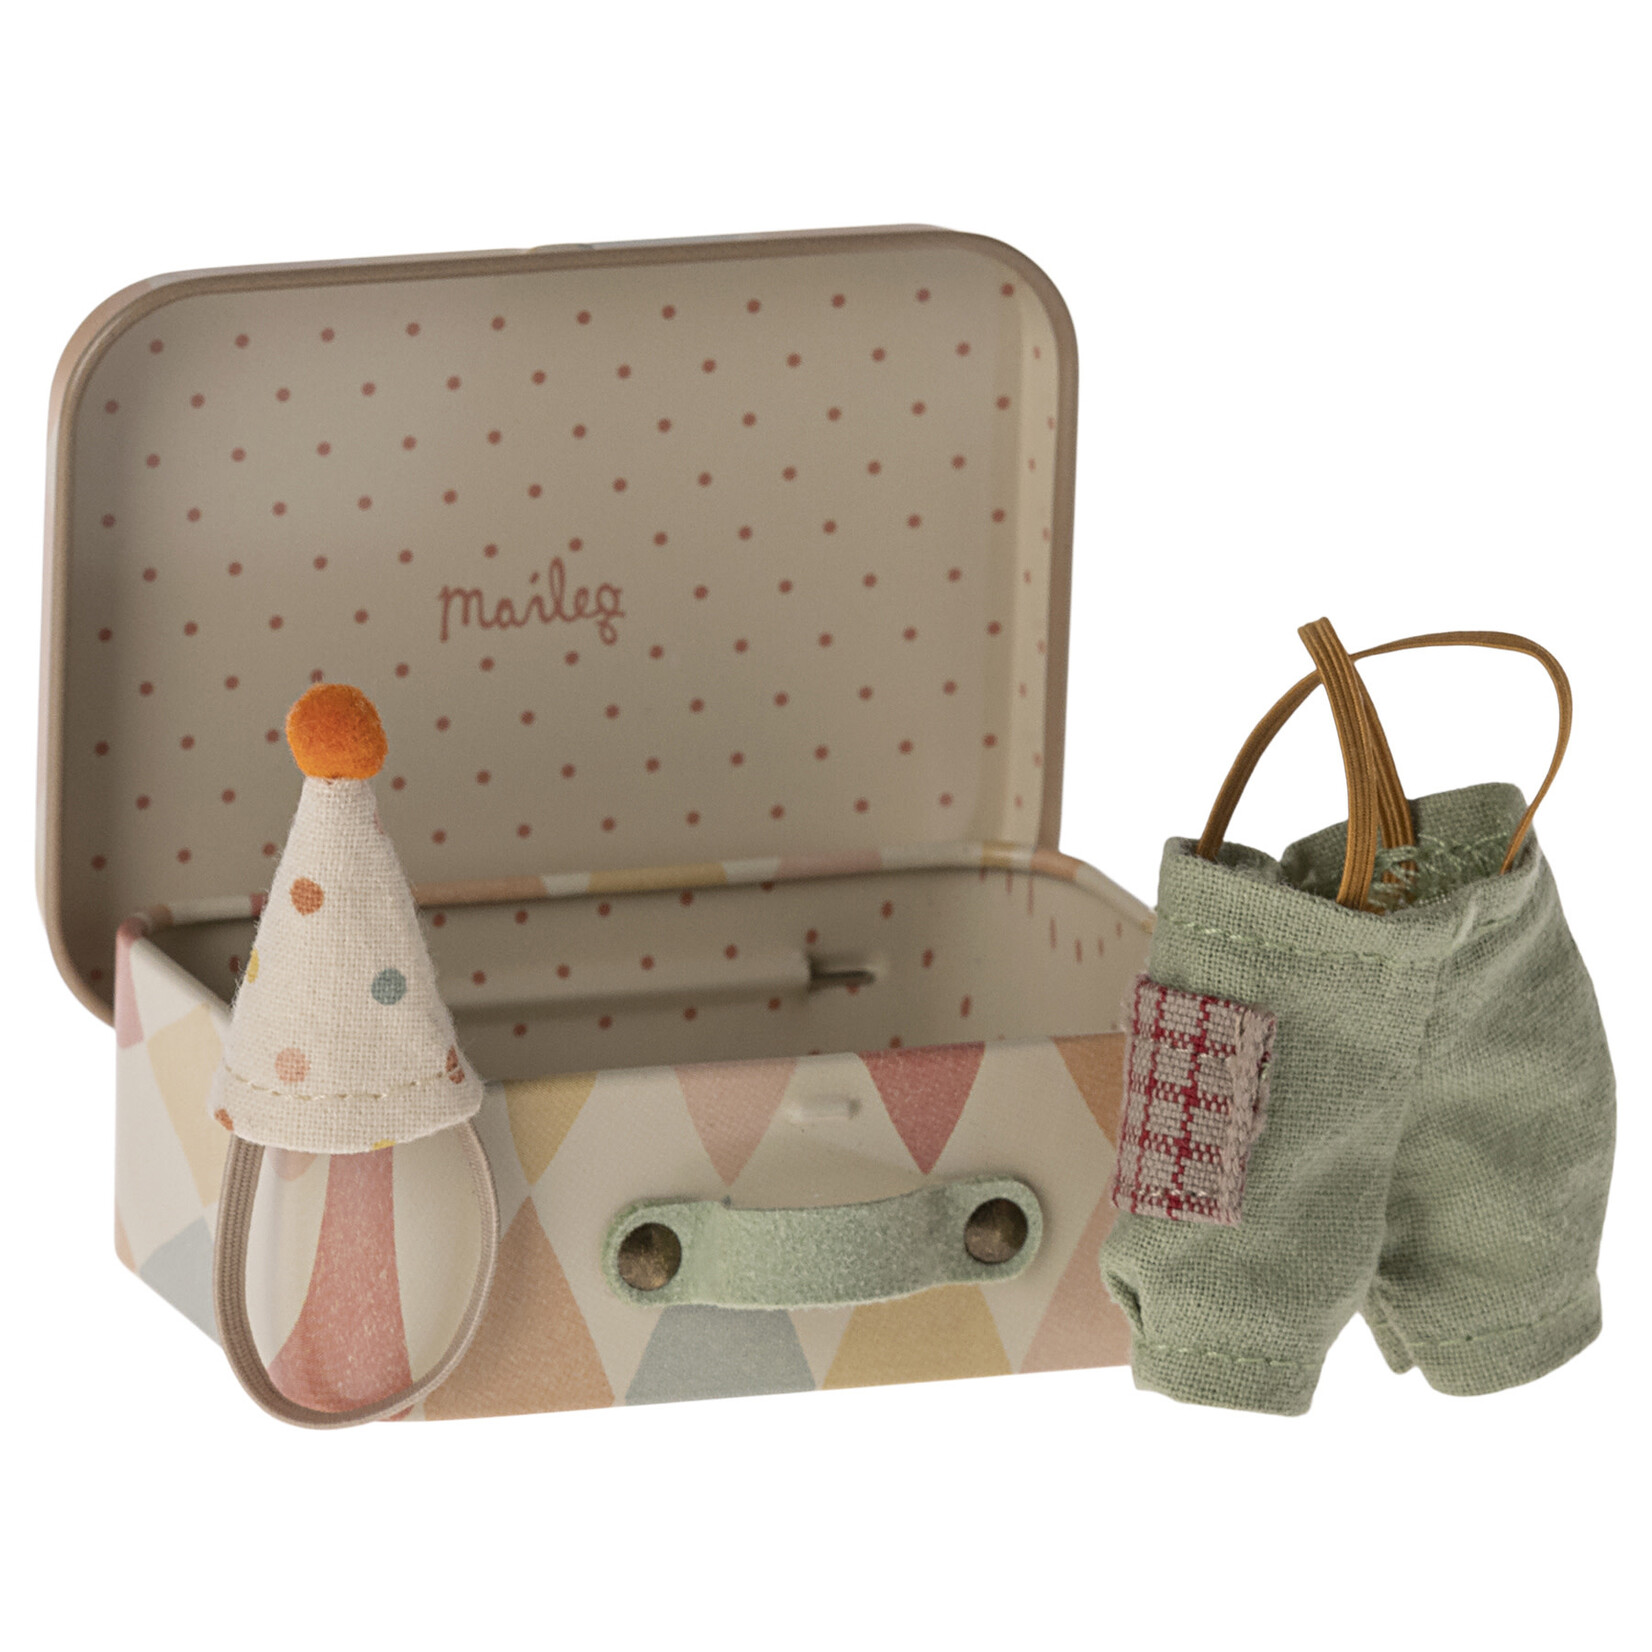 Maileg PRE ORDER Maileg Clown CLOTHES in suitcase for Little brother mouse - Estimated arrival mid/end May